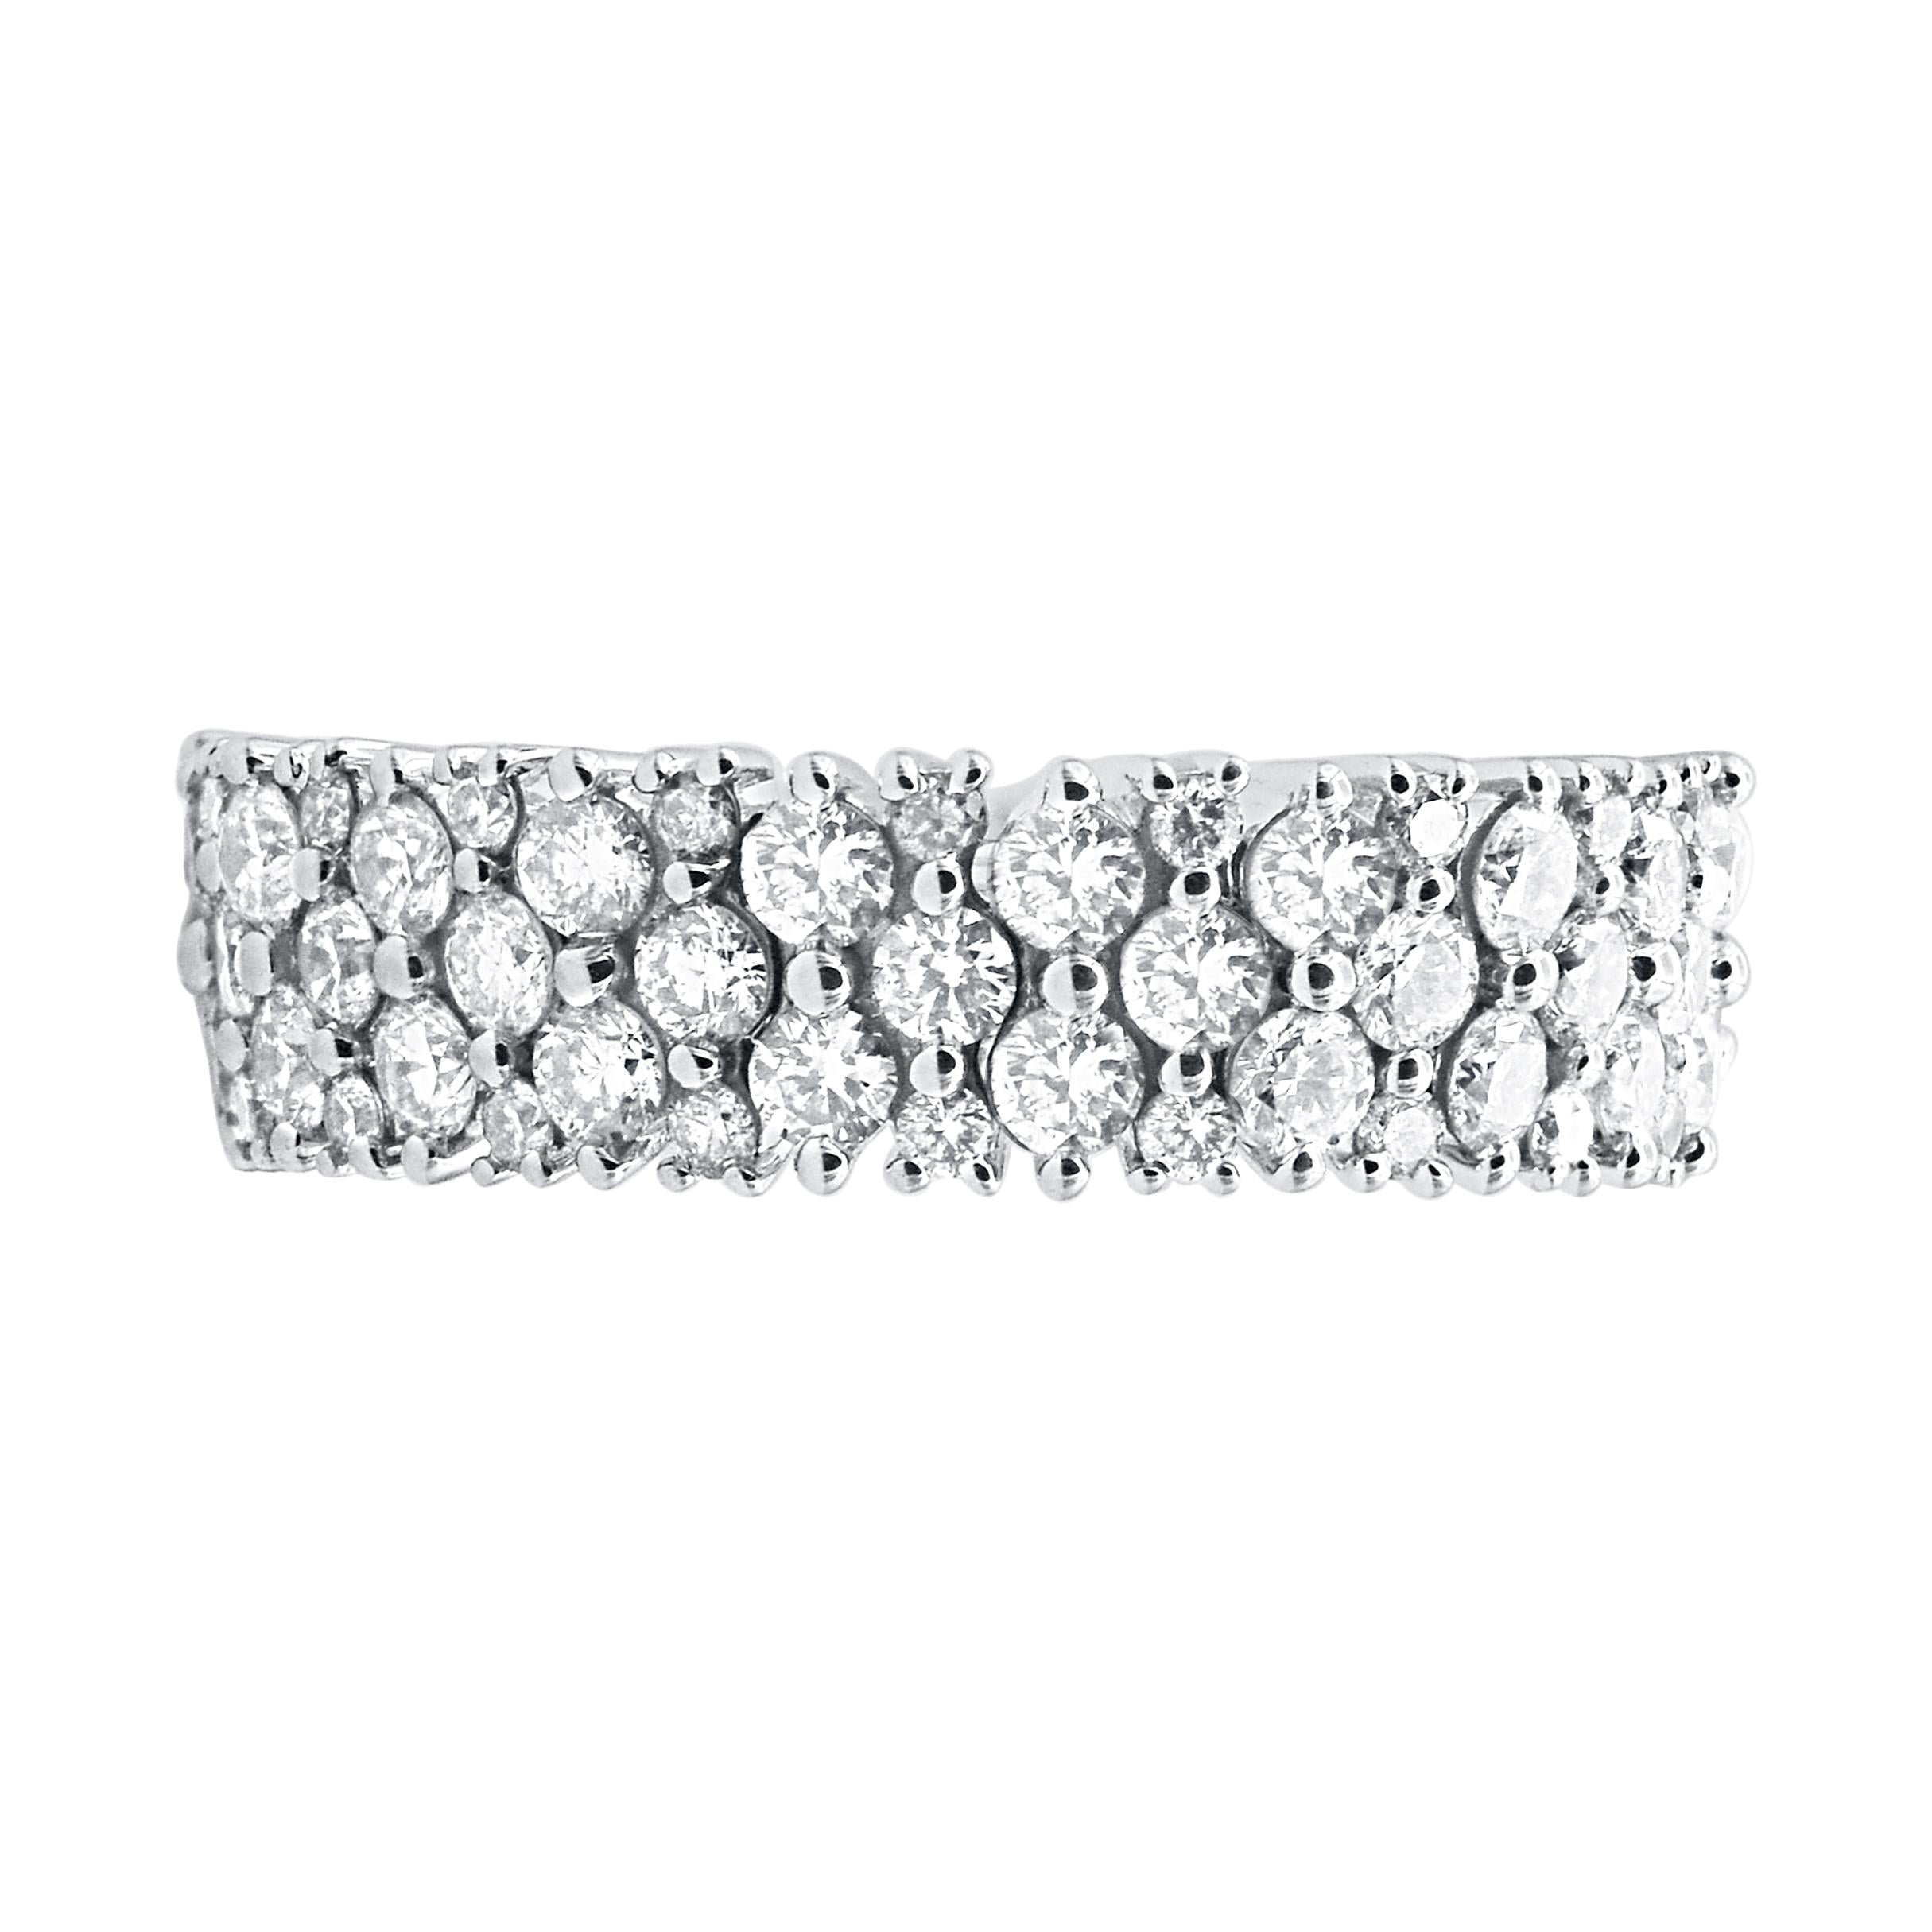 Contemporary TJD 2.50 Carat Brilliant Cut Diamond Eternity Band Ring in 14 Karat White Gold For Sale